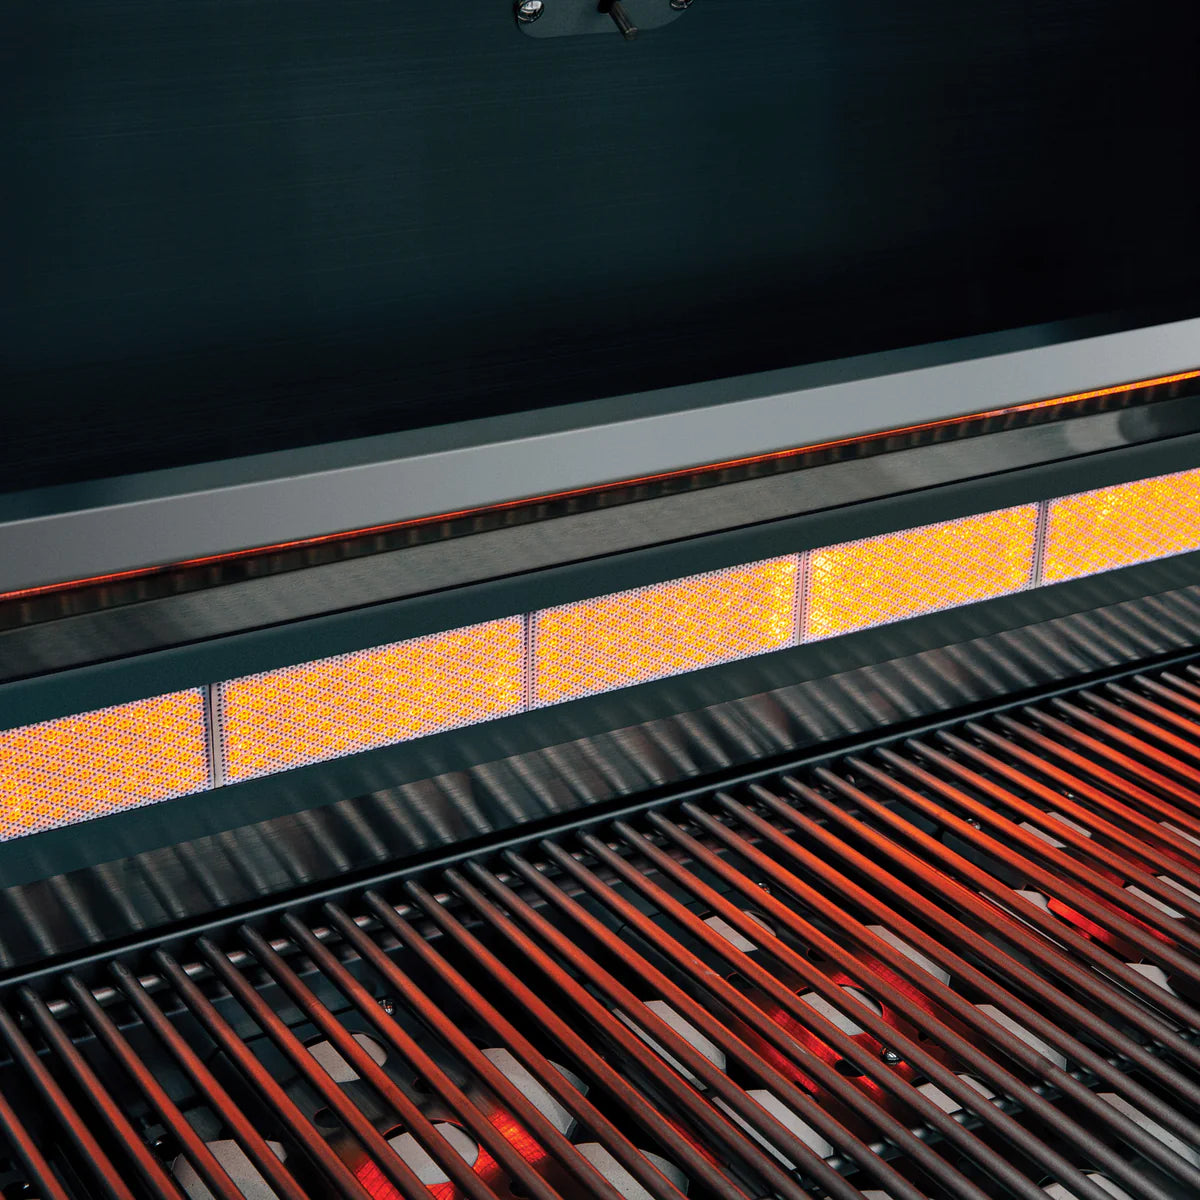 Sizzler Pro 32" Built-in Grill